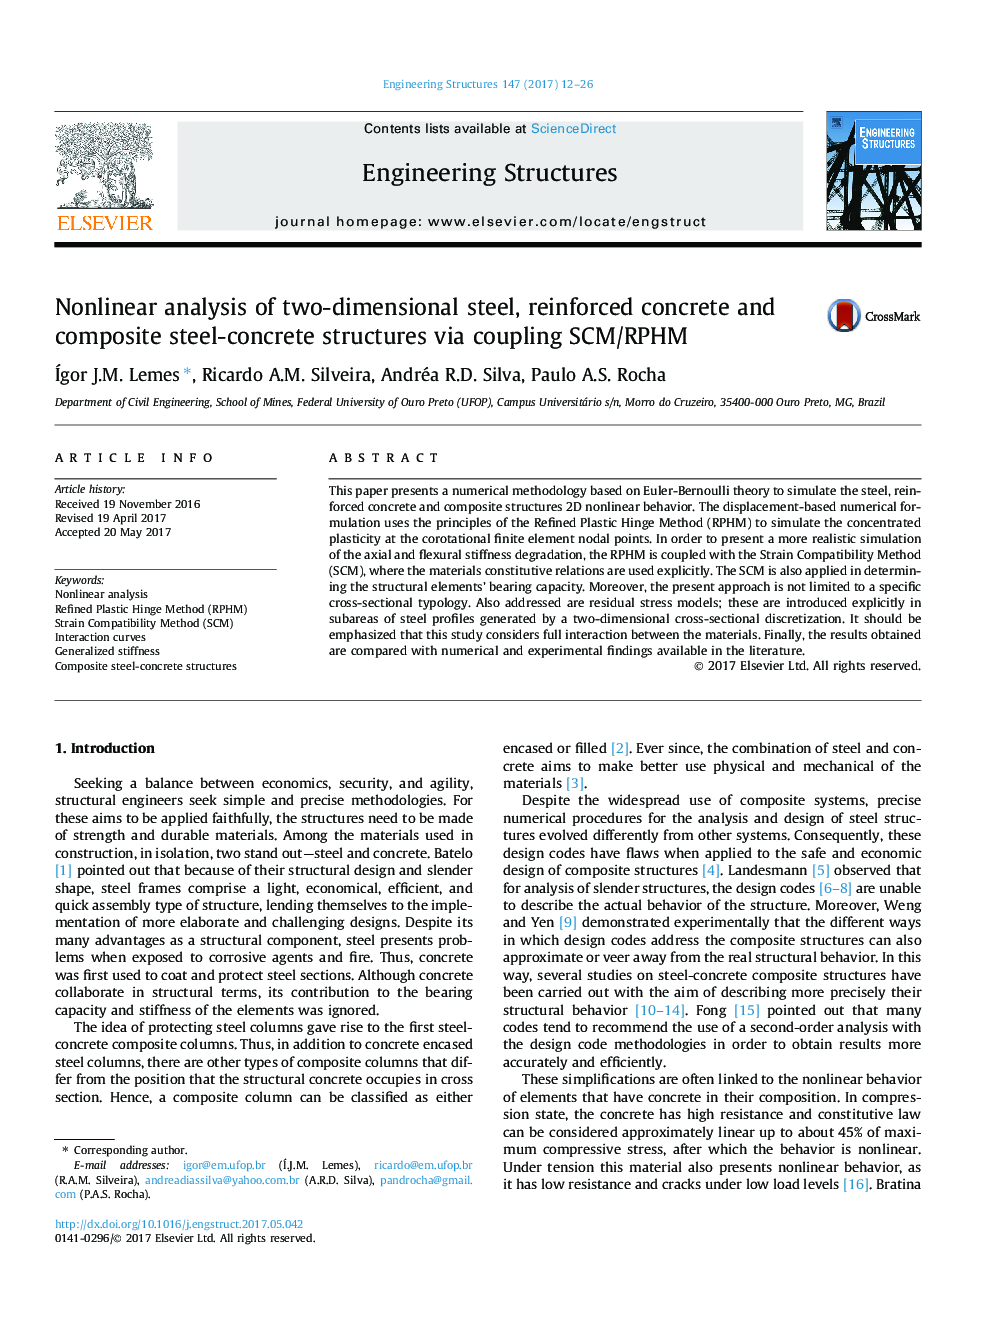 Nonlinear analysis of two-dimensional steel, reinforced concrete and composite steel-concrete structures via coupling SCM/RPHM